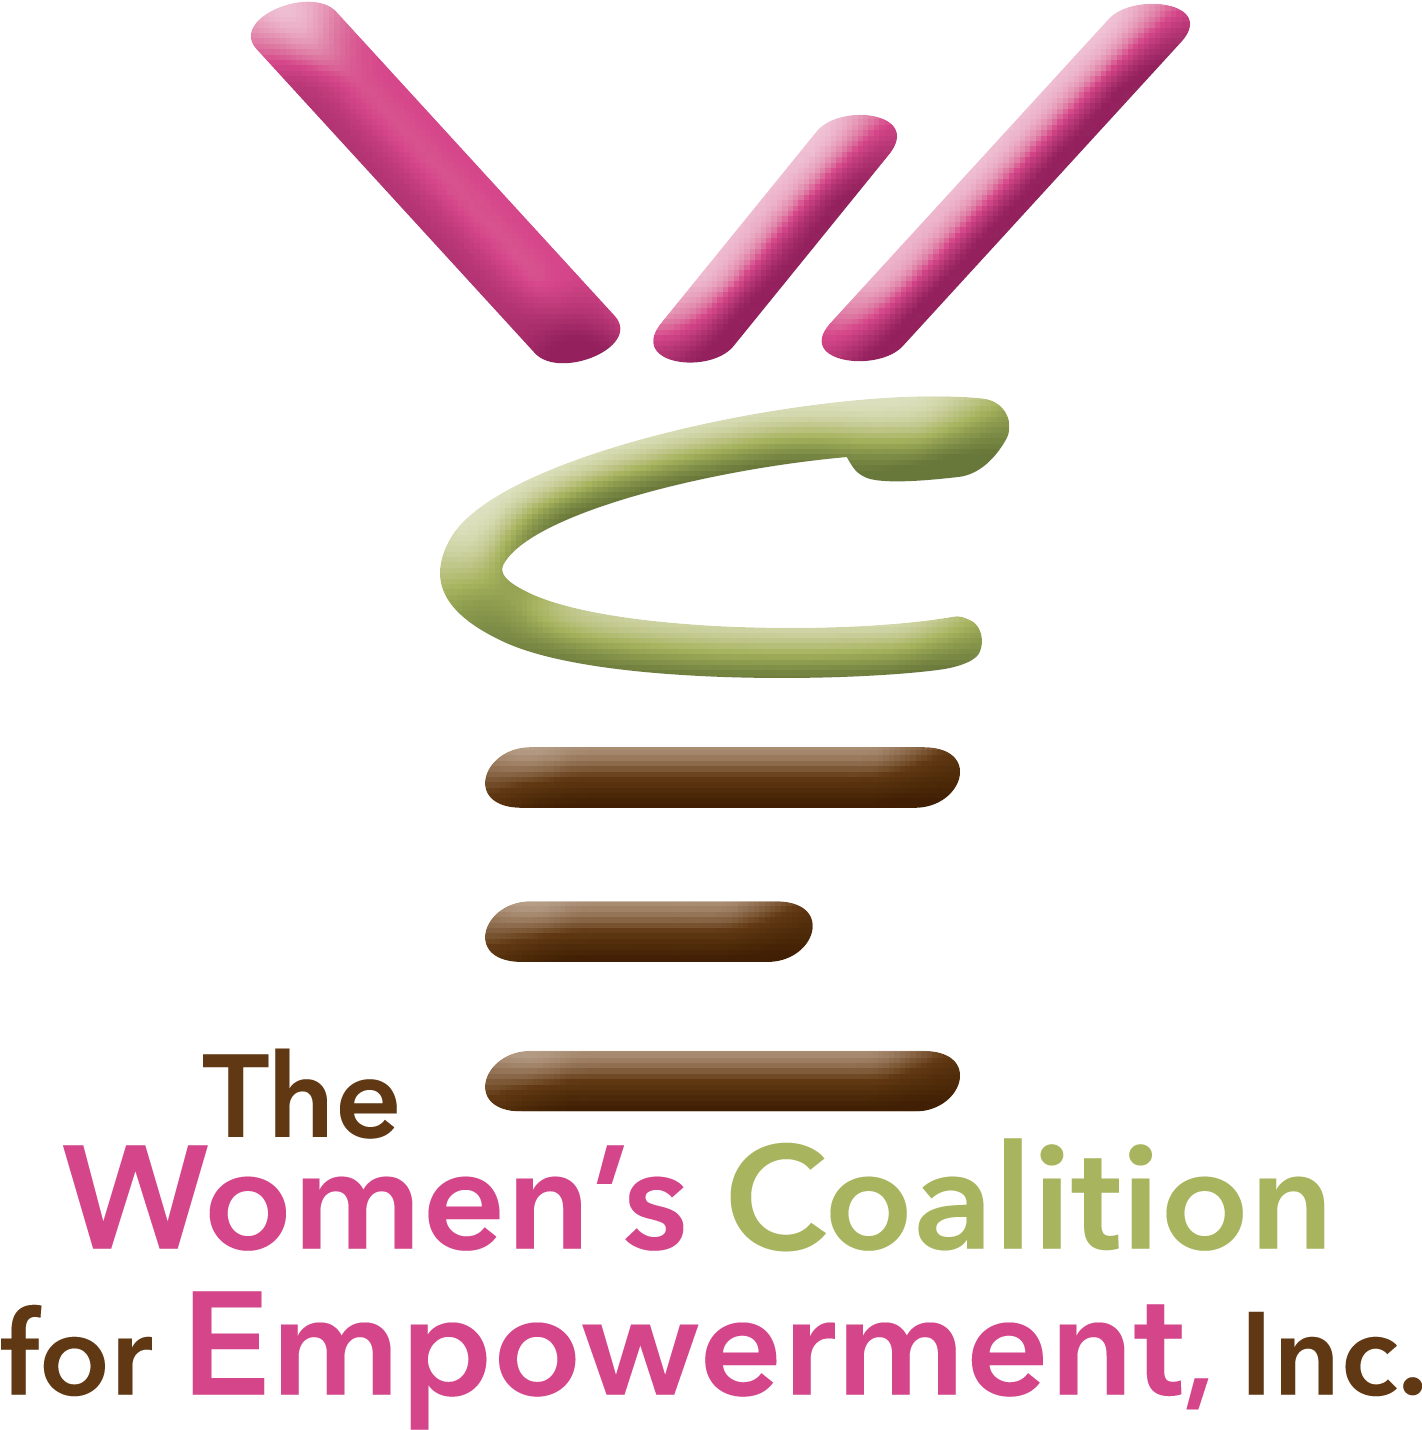 Dedicated To Educating, Uniting, And Empowering Women - Meredith Corporation (1421x1451)